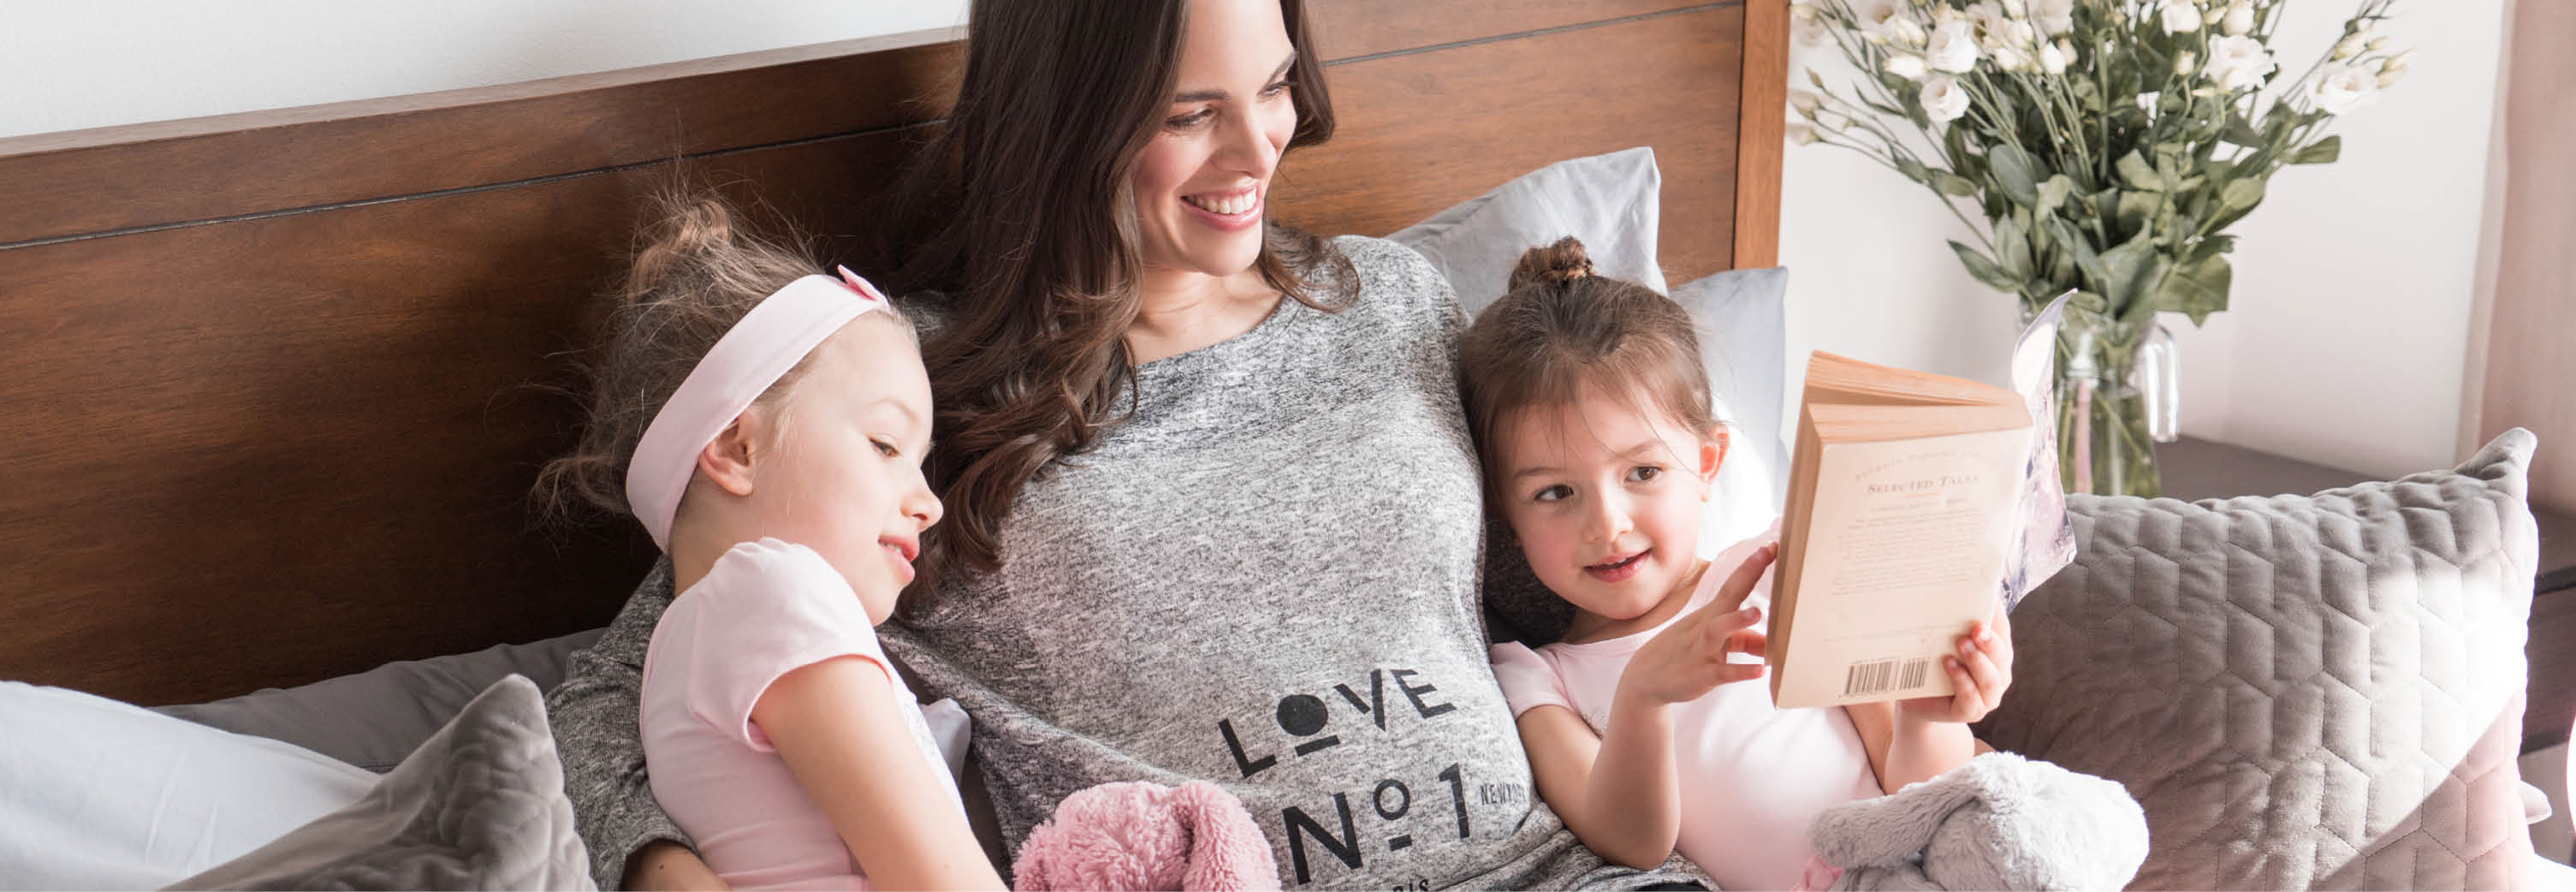 Mum & daughters read pregnancy books together